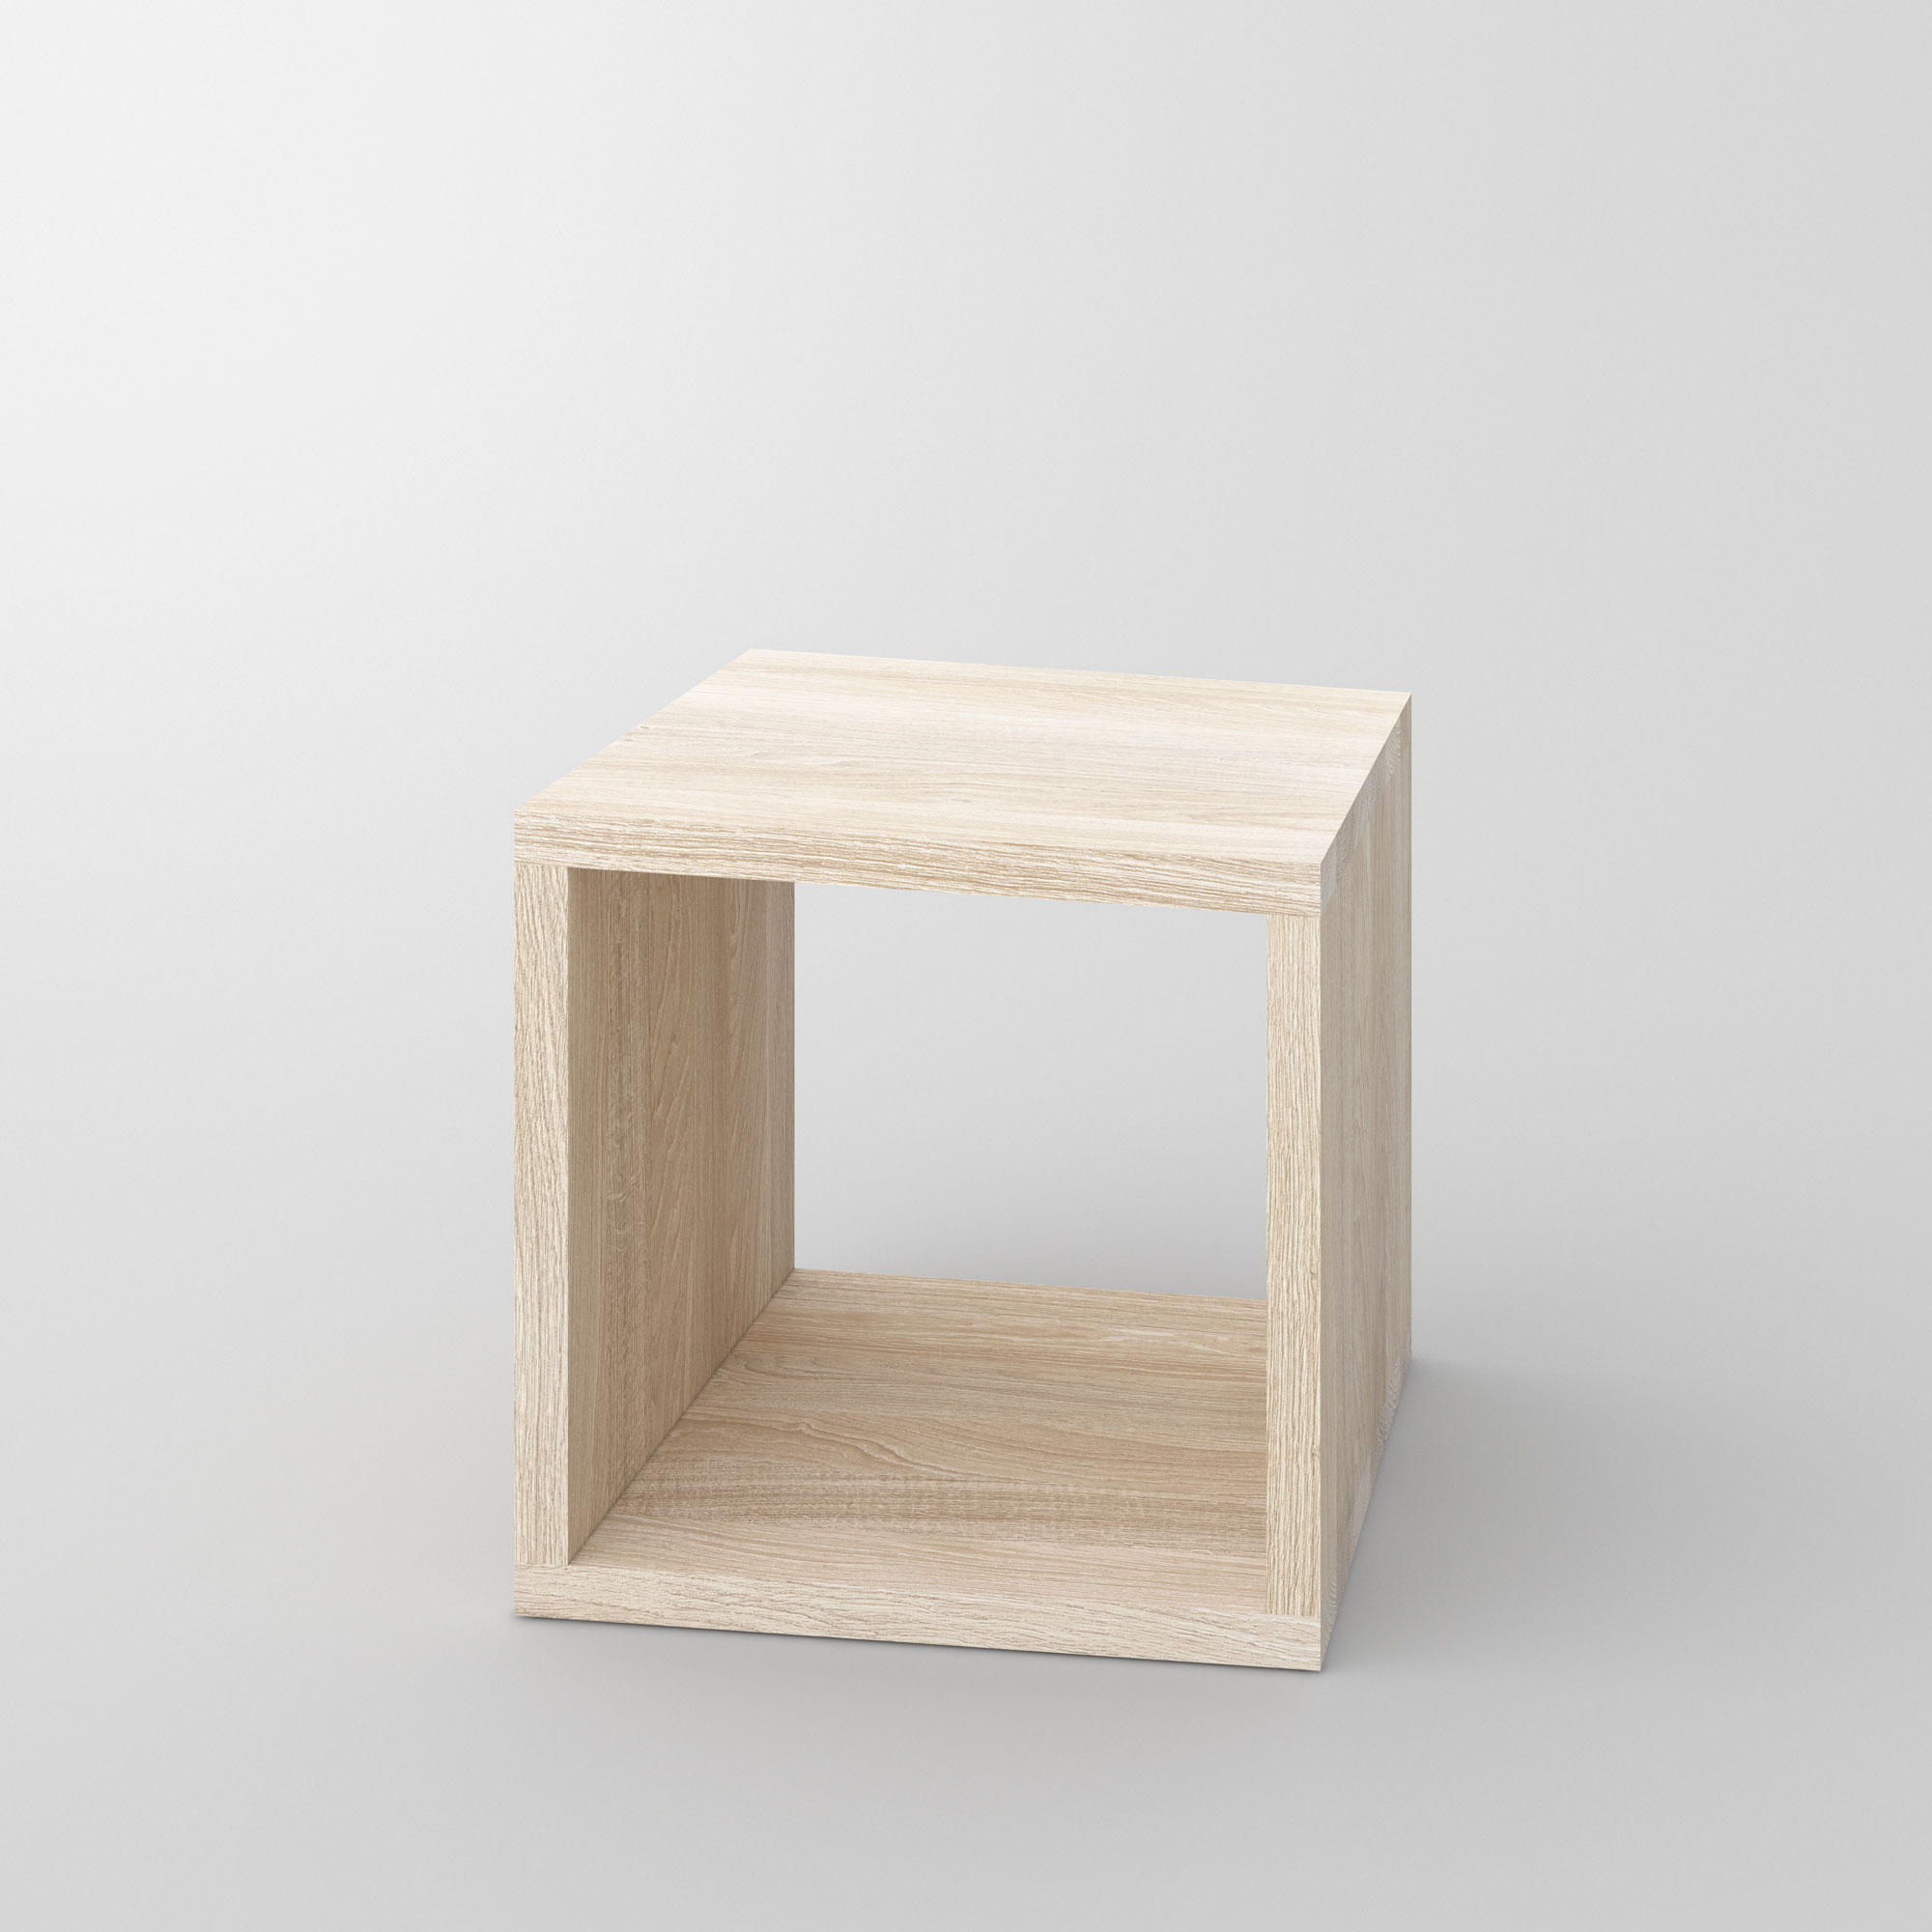 Solid Wood Night Table MENA B cam2 custom made in solid wood by vitamin design